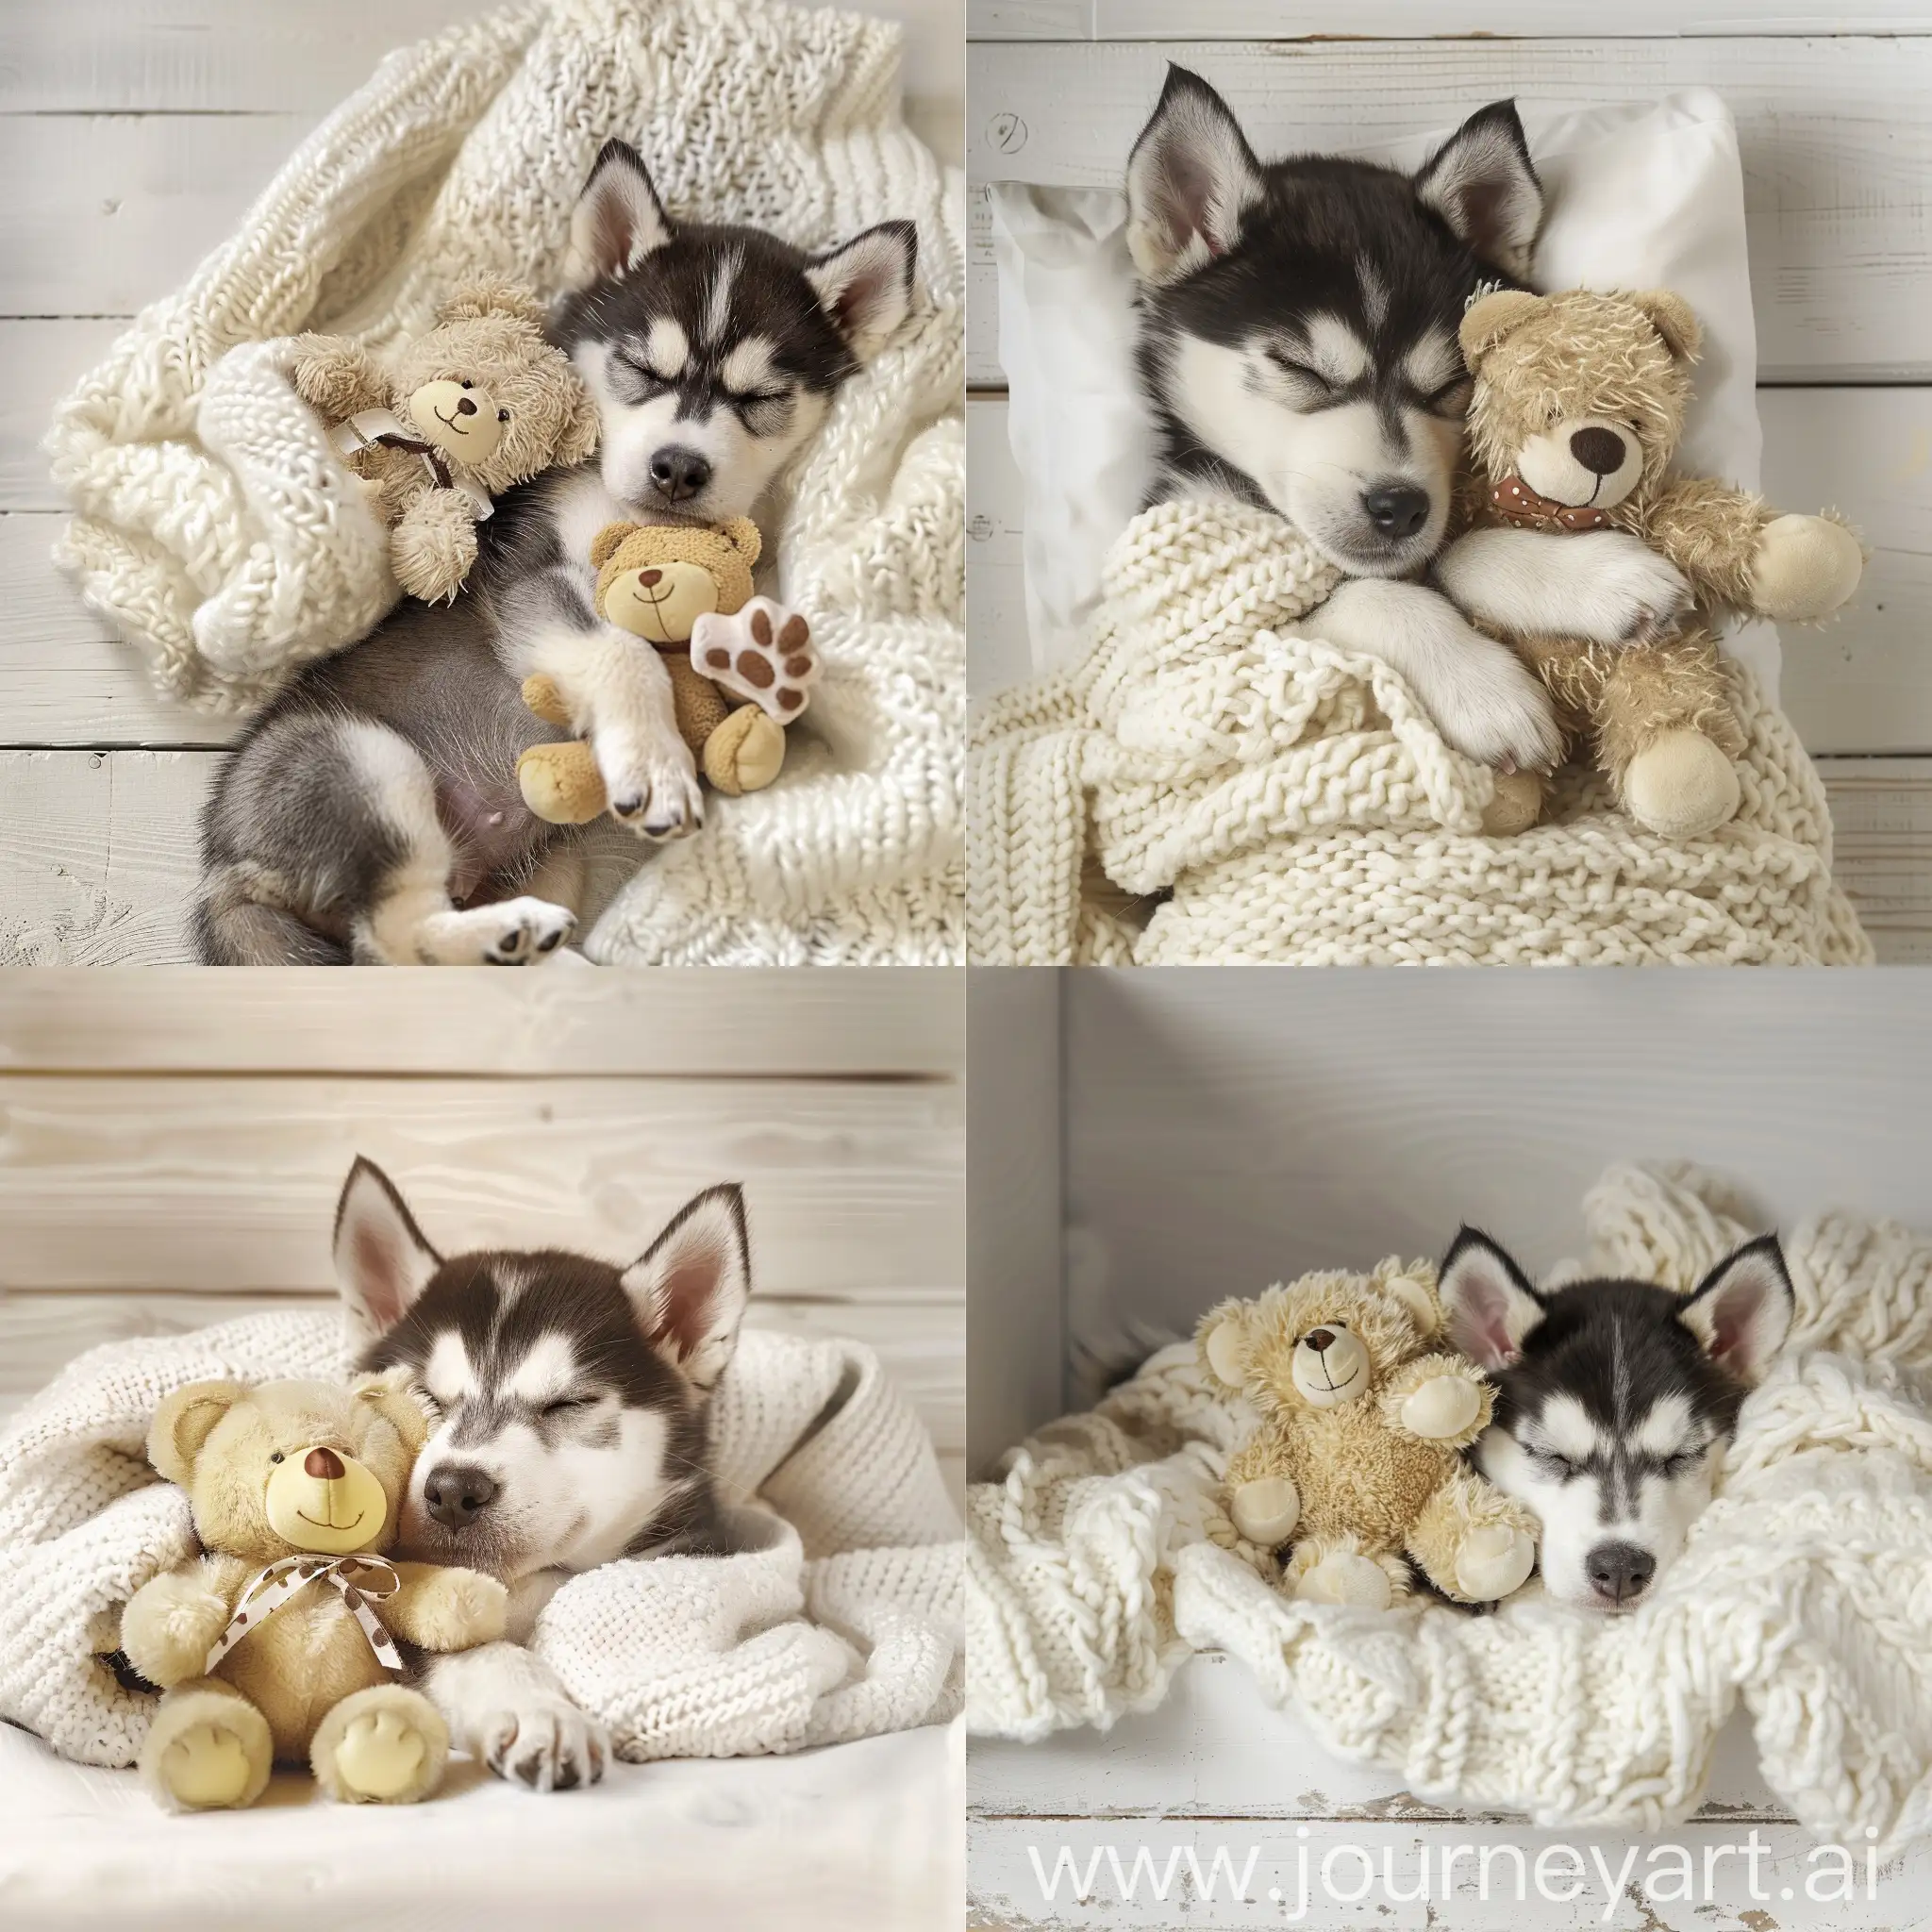 A cute puppy husky sleeping holding a stuffed fuzzy teddy bear, under white cream colored blanket on a pale wooden surface, photorealistic, photo